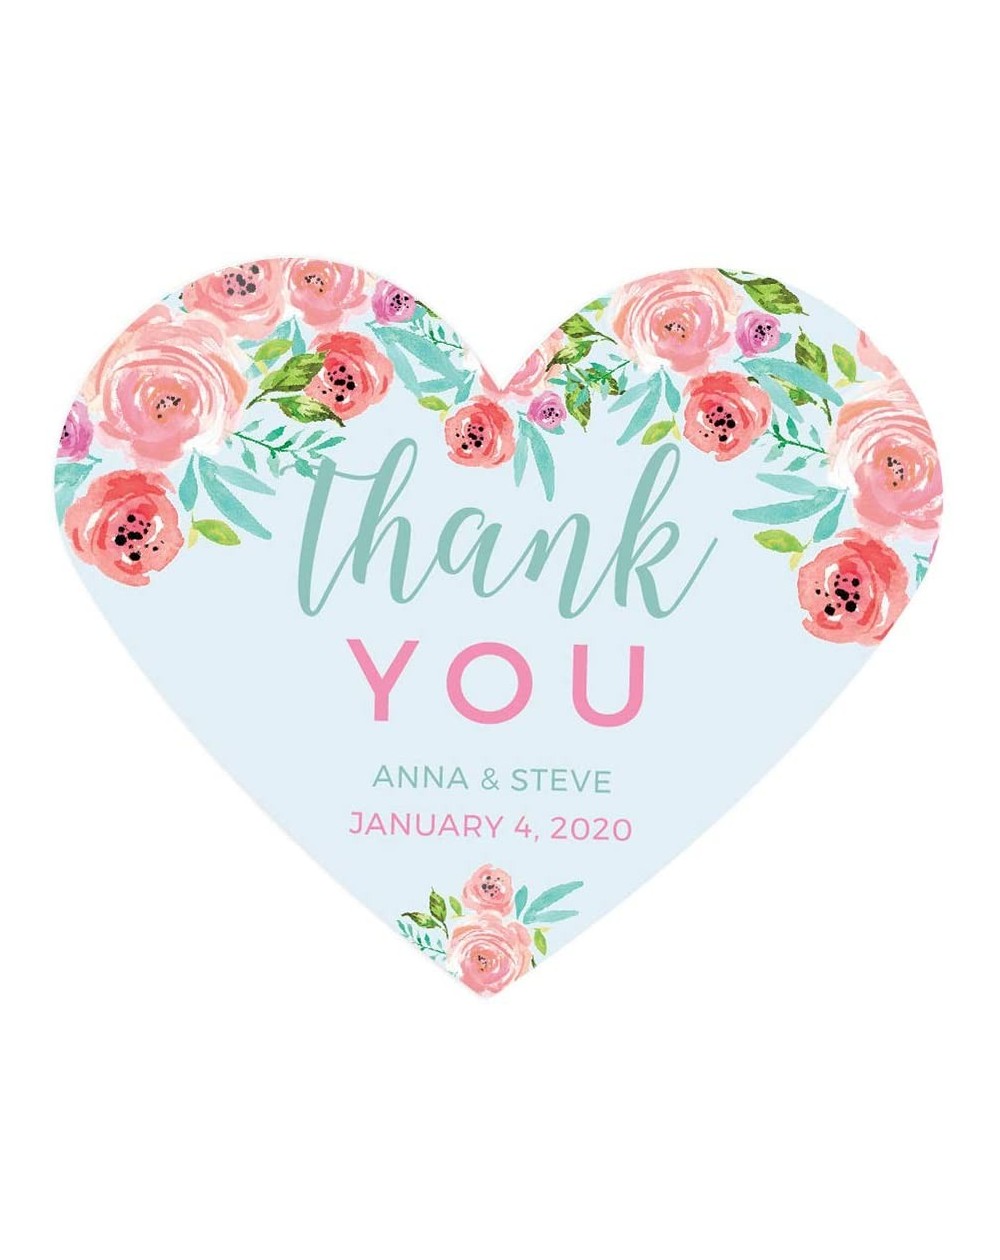 Favors Pink Roses English Tea Party Tea Party Wedding Collection- Personalized Heart Label Stickers- Thank You Anna & Steve J...